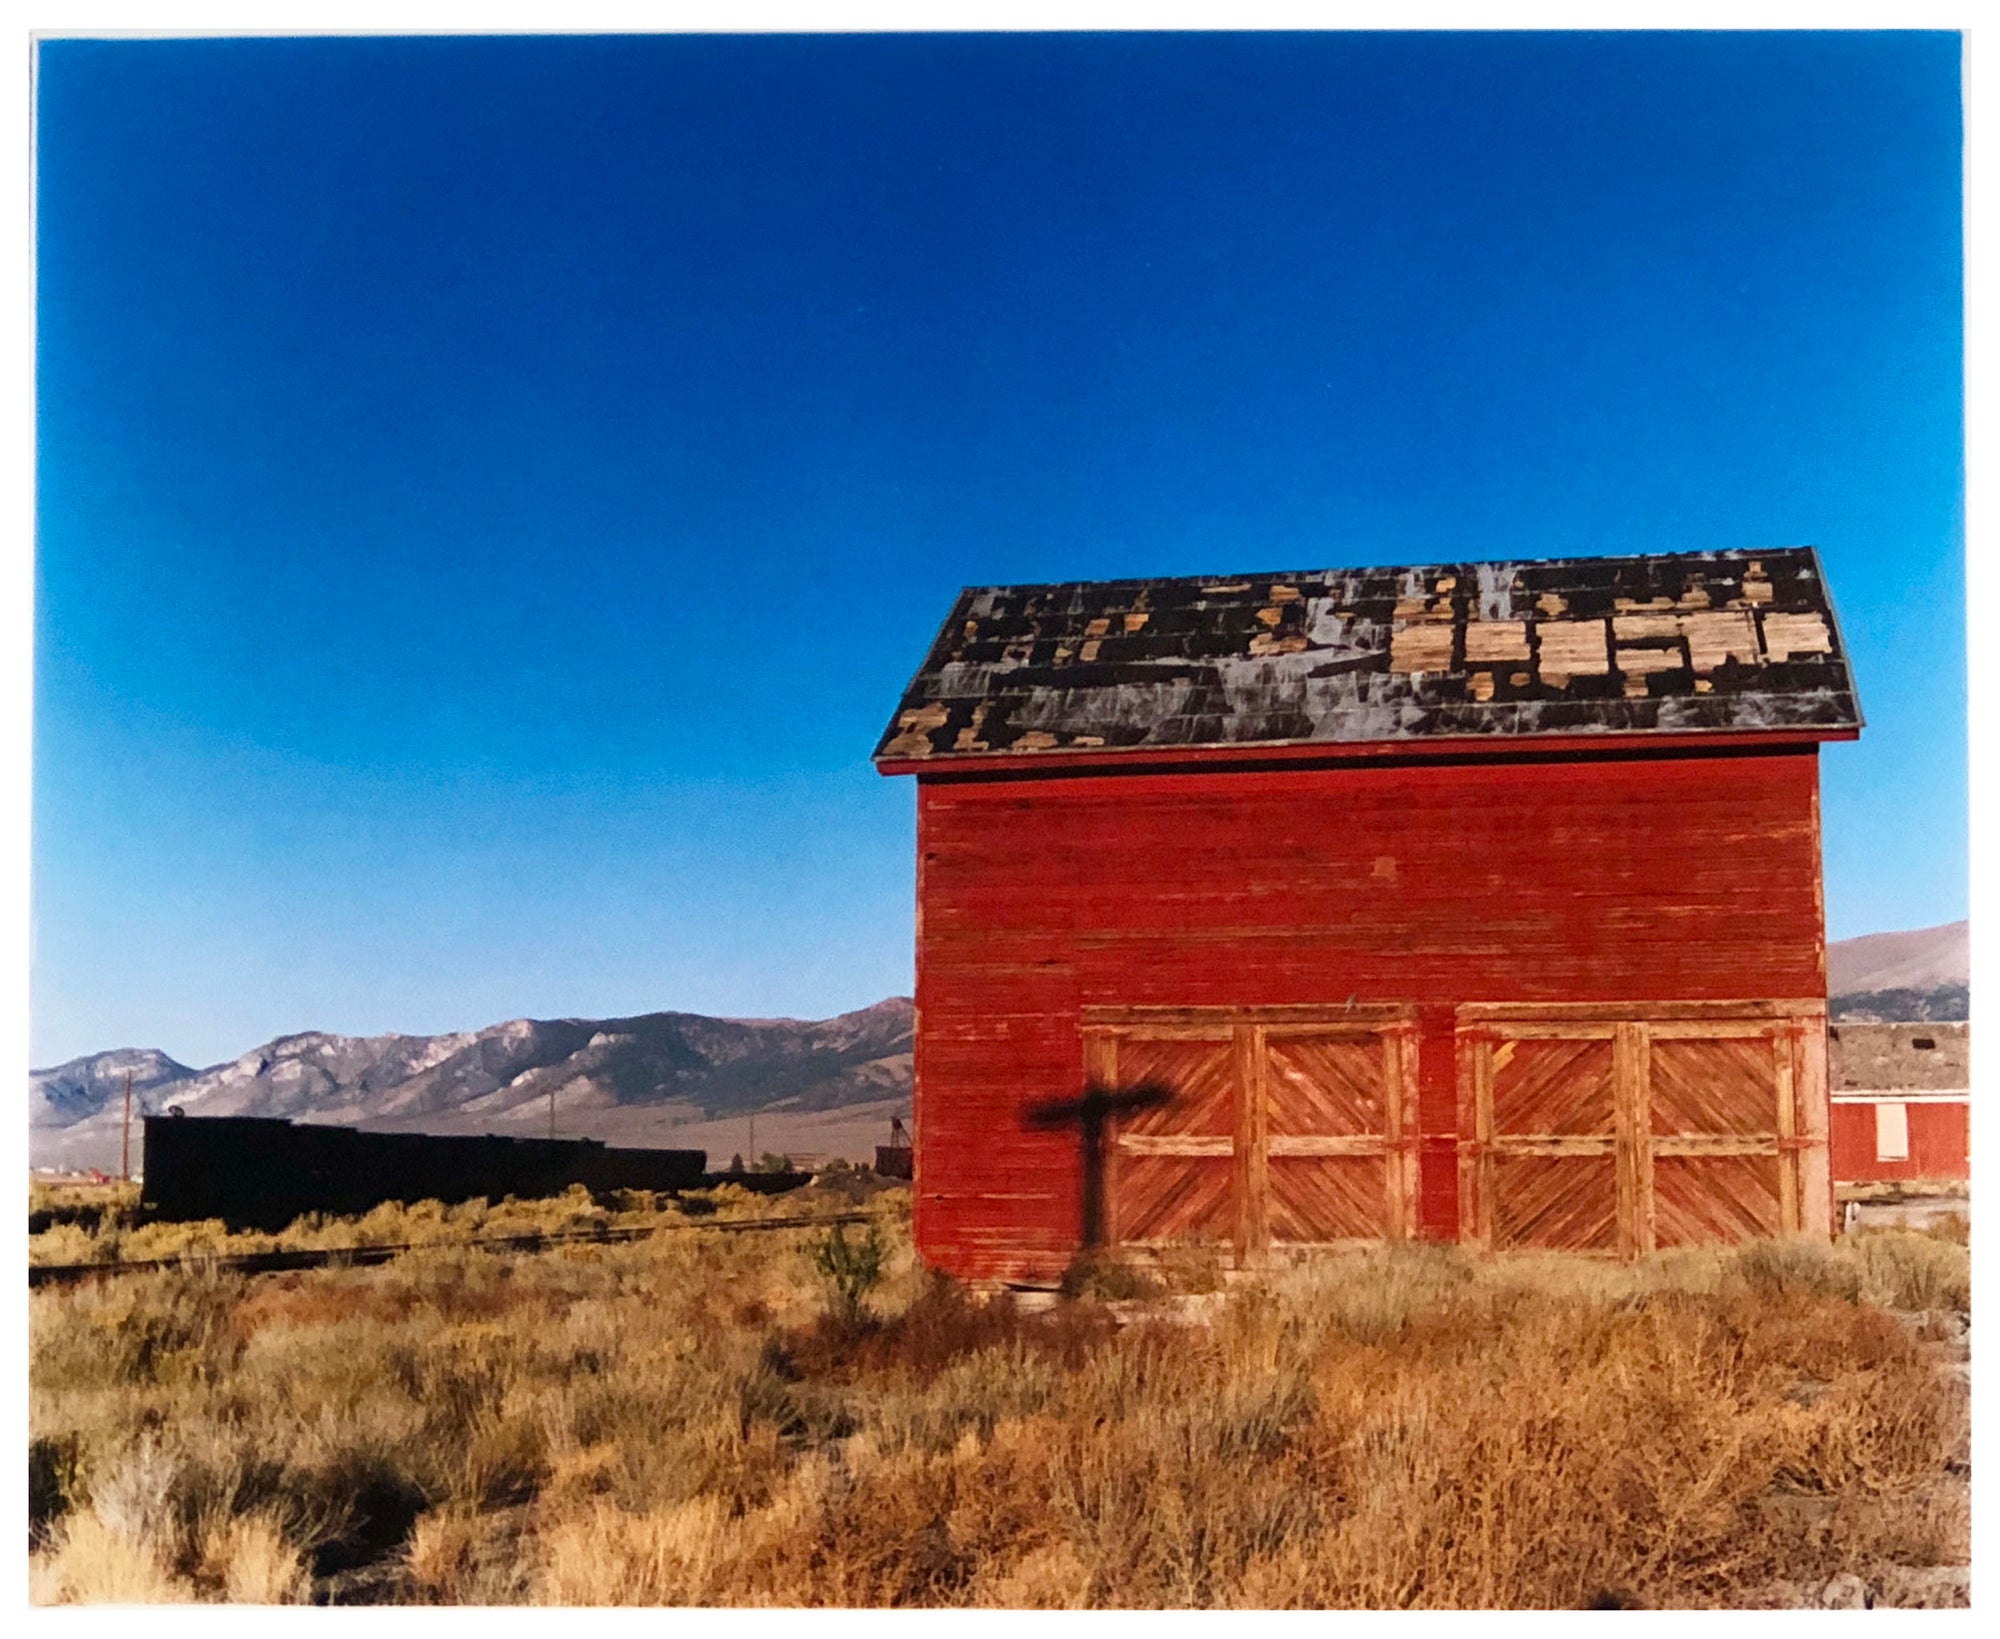 A red shed against a blue sky in a landscape photograph taken in Nevada on an American road trip by Richard Heeps.